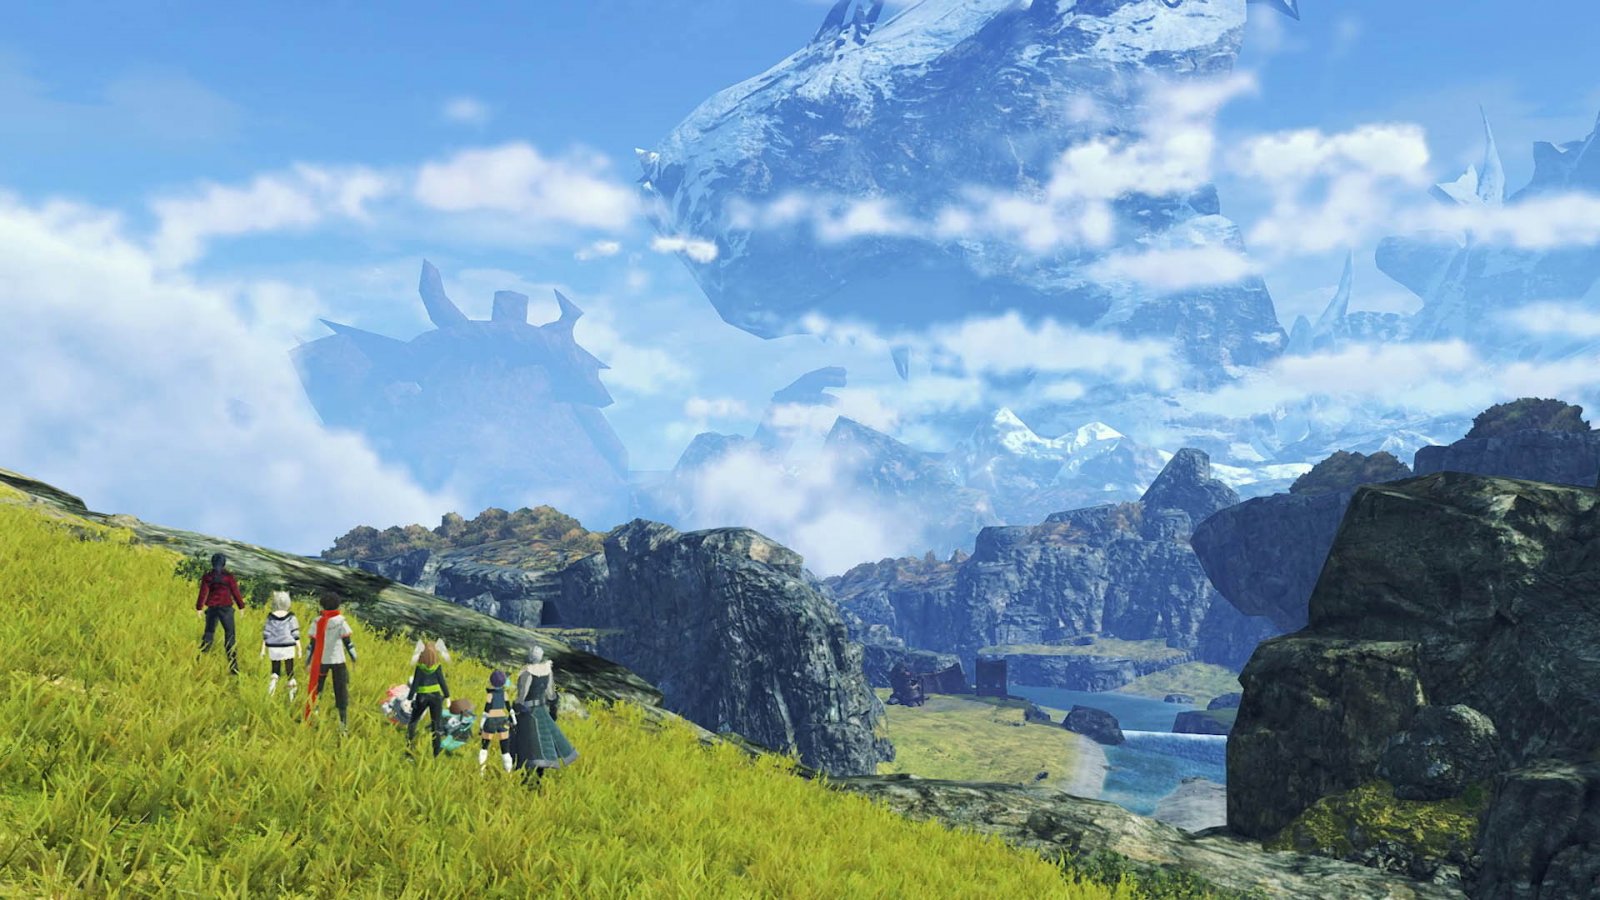 Xenoblade Chronicles 3: Future Redeemed